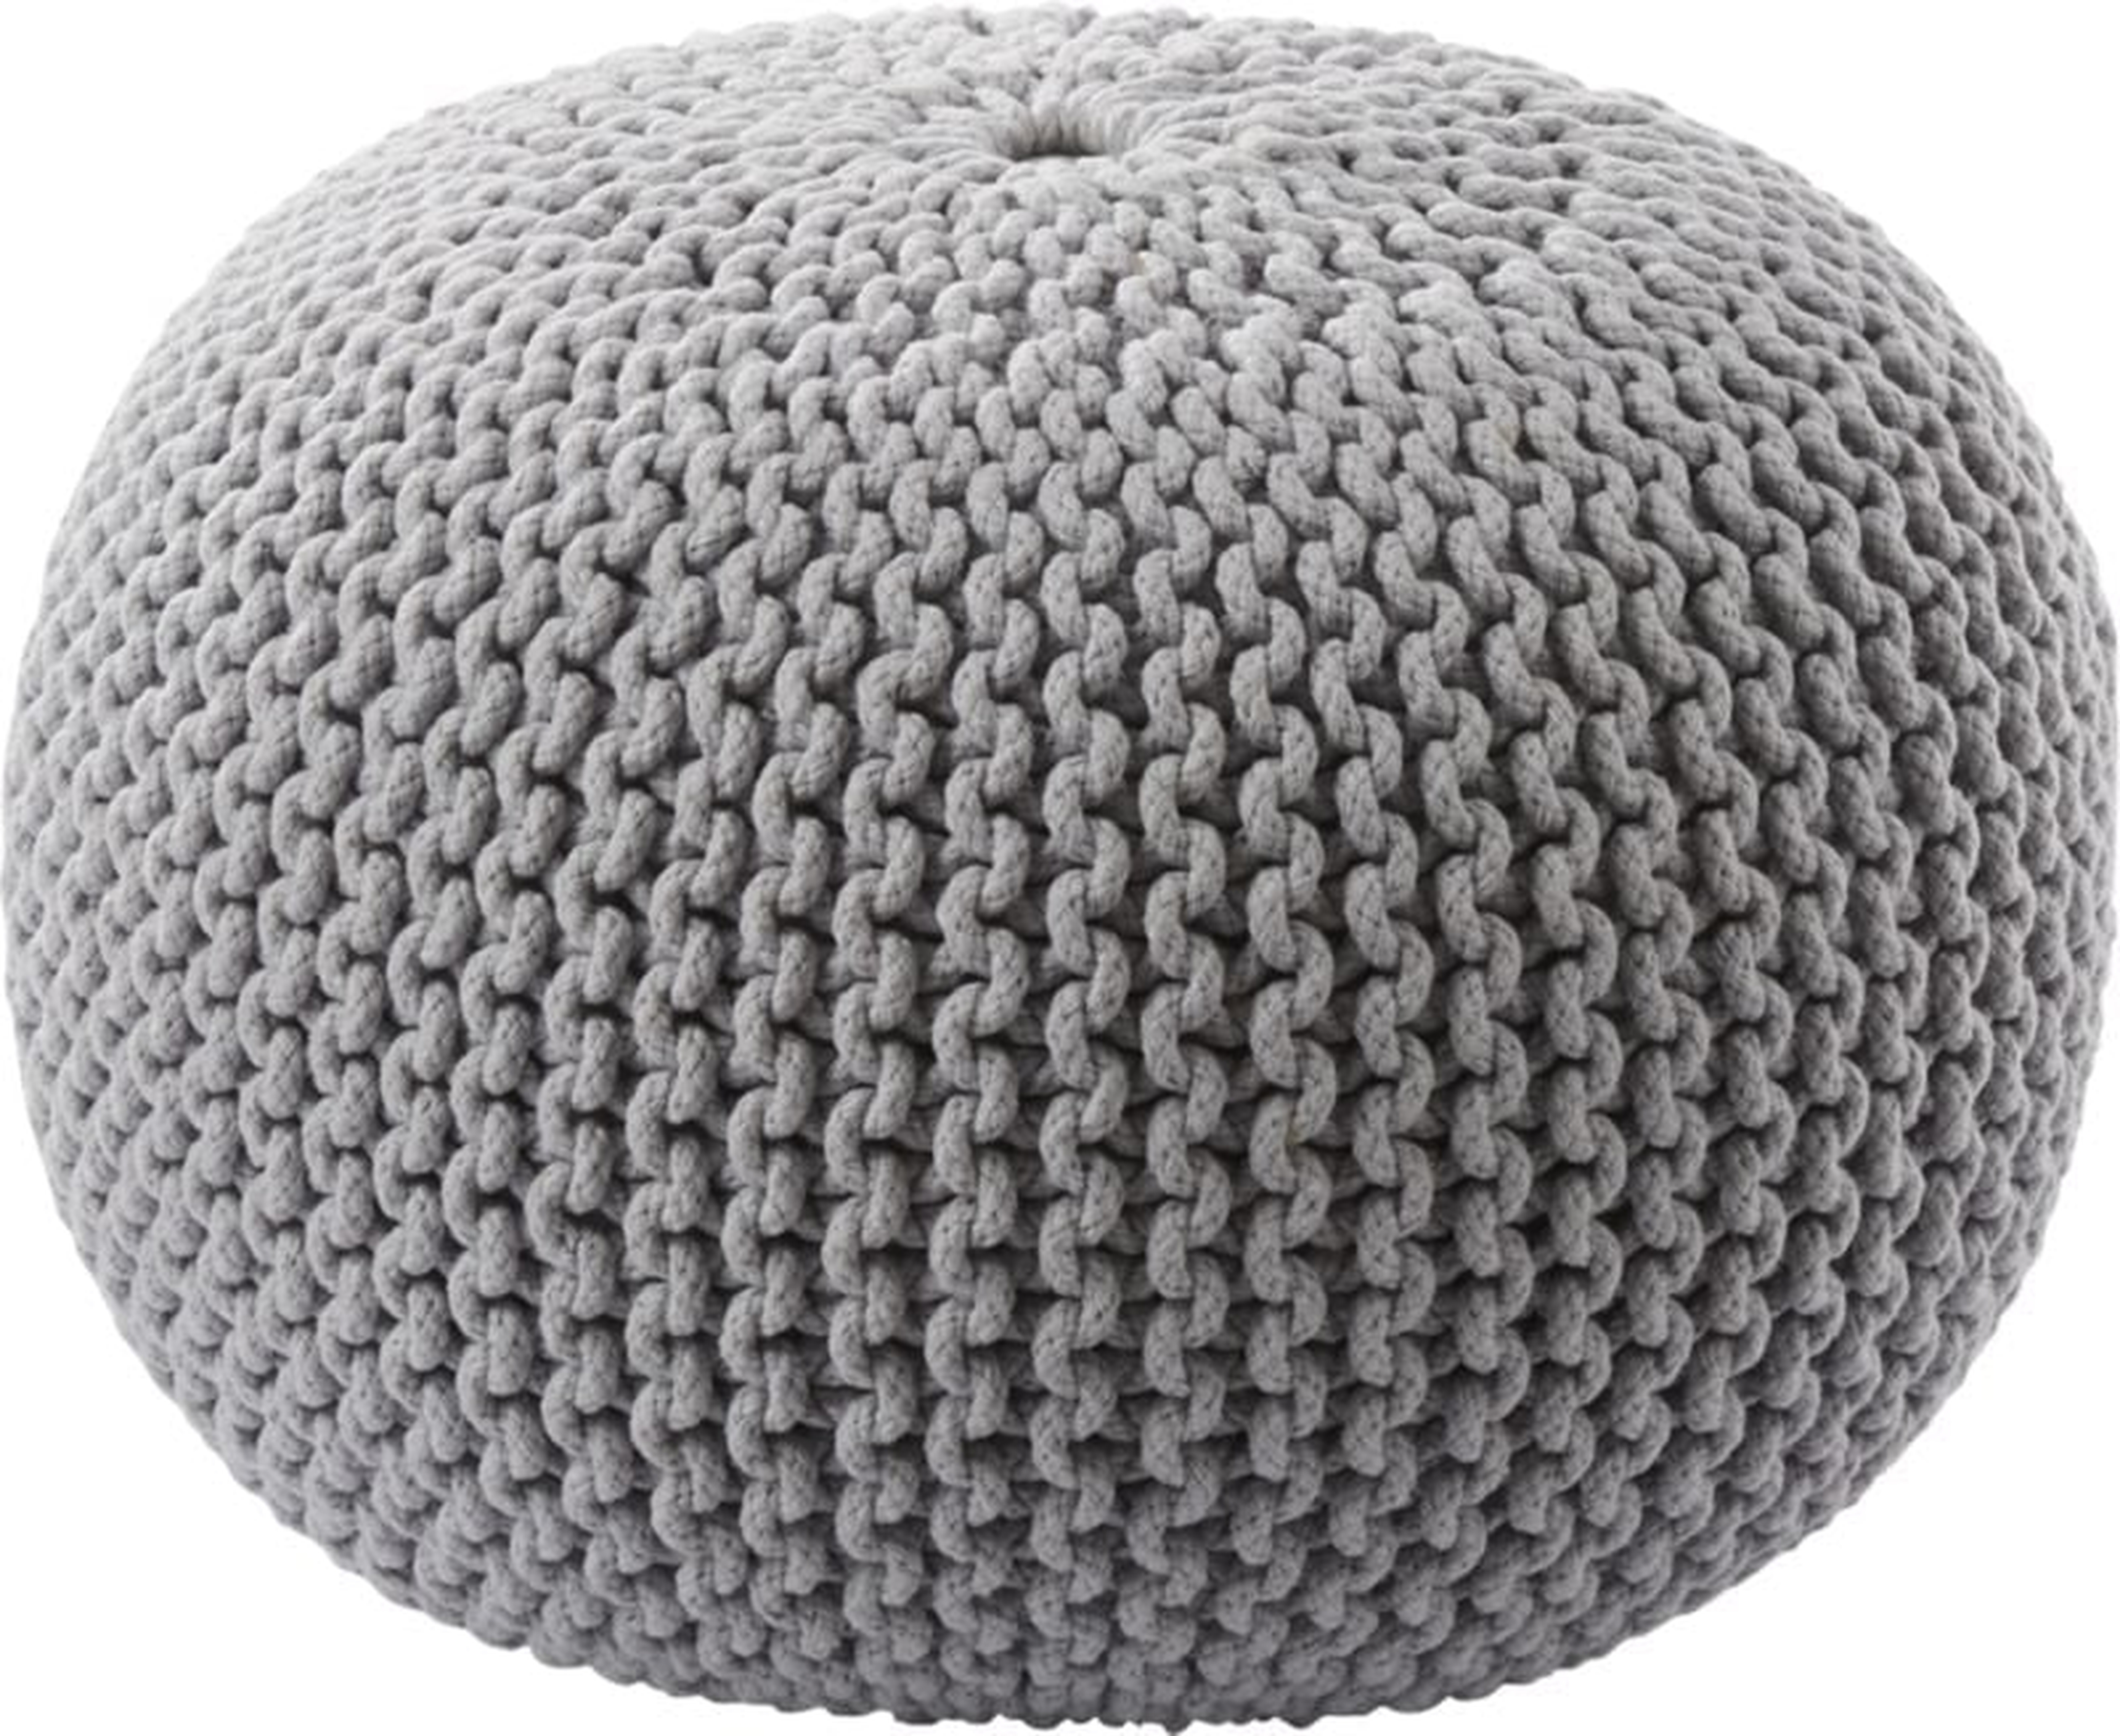 Knitted Pouf, Silver Gray - CB2